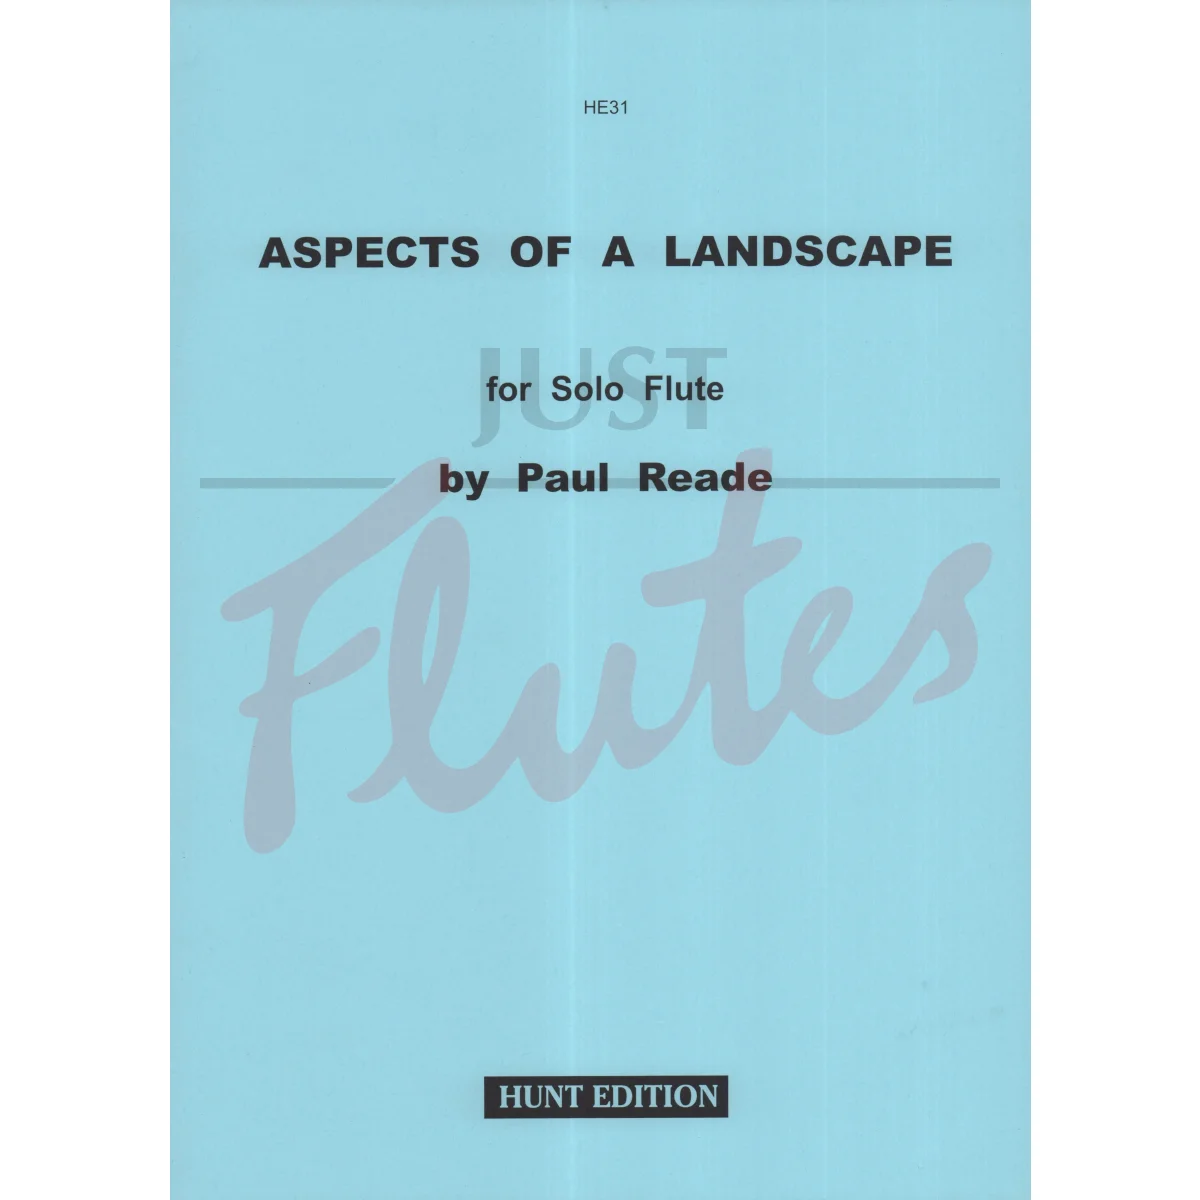 Aspects of a Landscape for Solo Flute